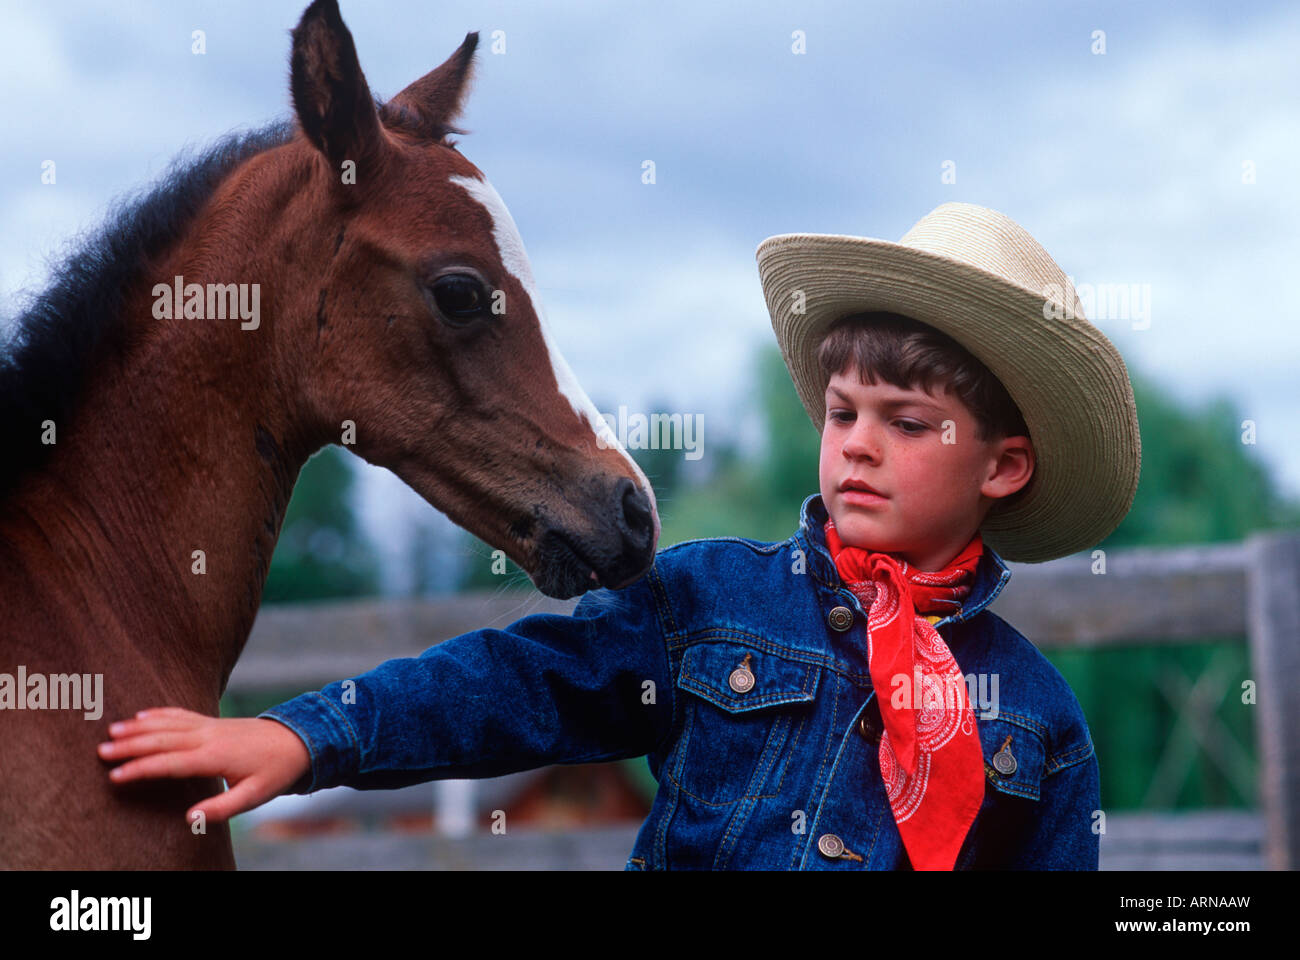 Cowboy gear with small colt, British Columbia, Canada. Stock Photo